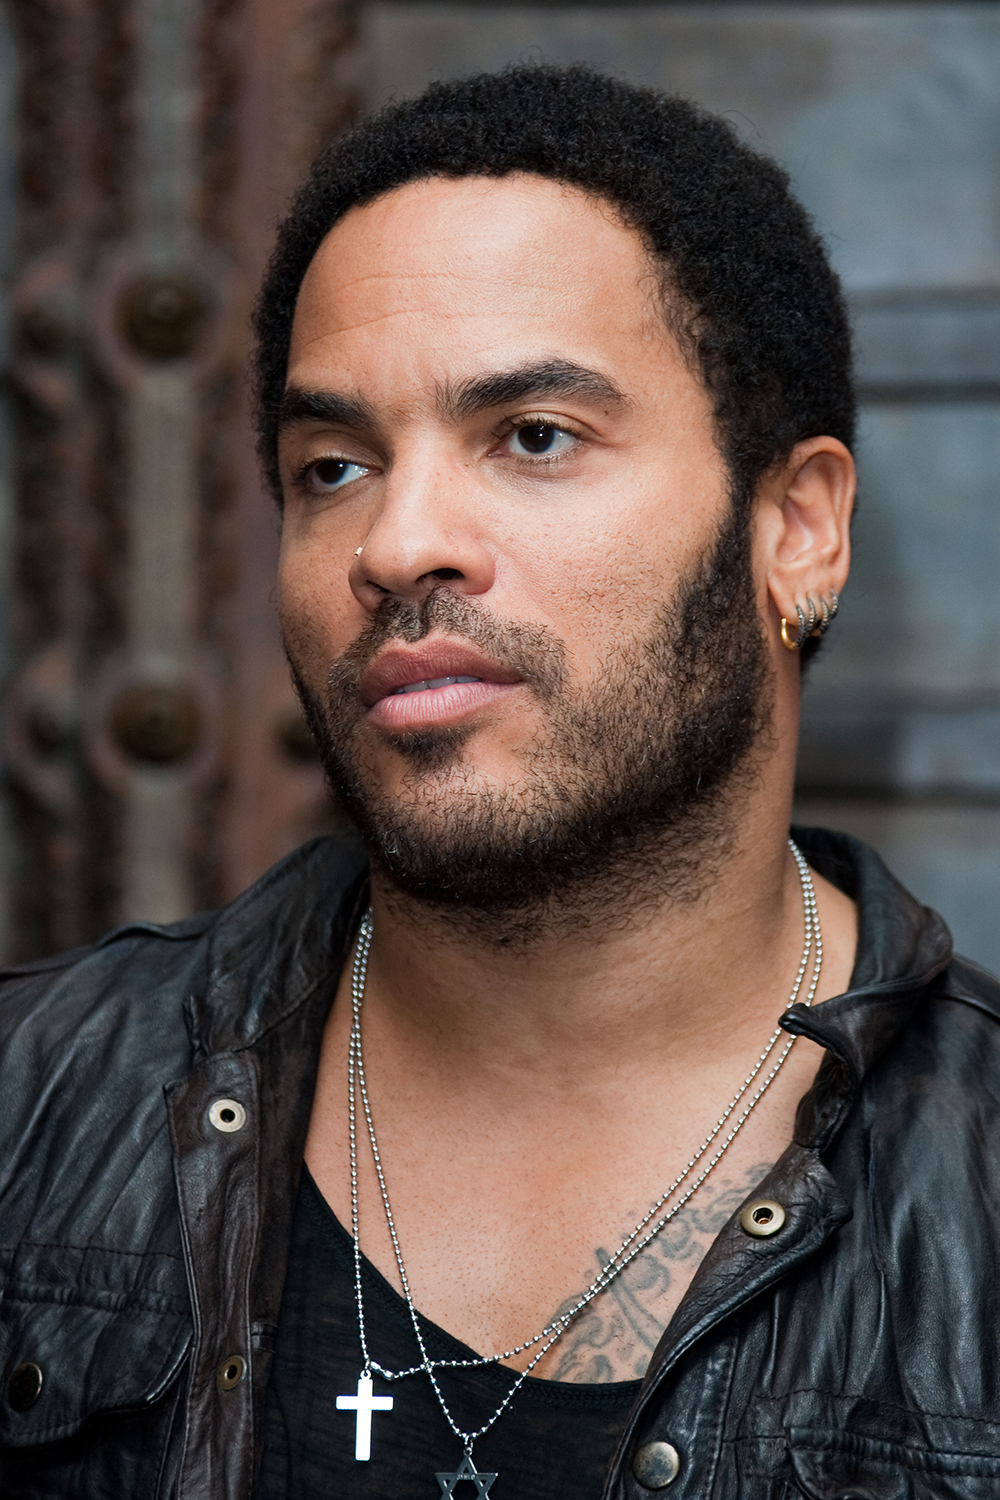 <p>Lenny Kravitz attends a photocall for the film ‘Precious’ during the 62nd Cannes Film Festival on May 15, 2009. It was his feature film debut.</p>